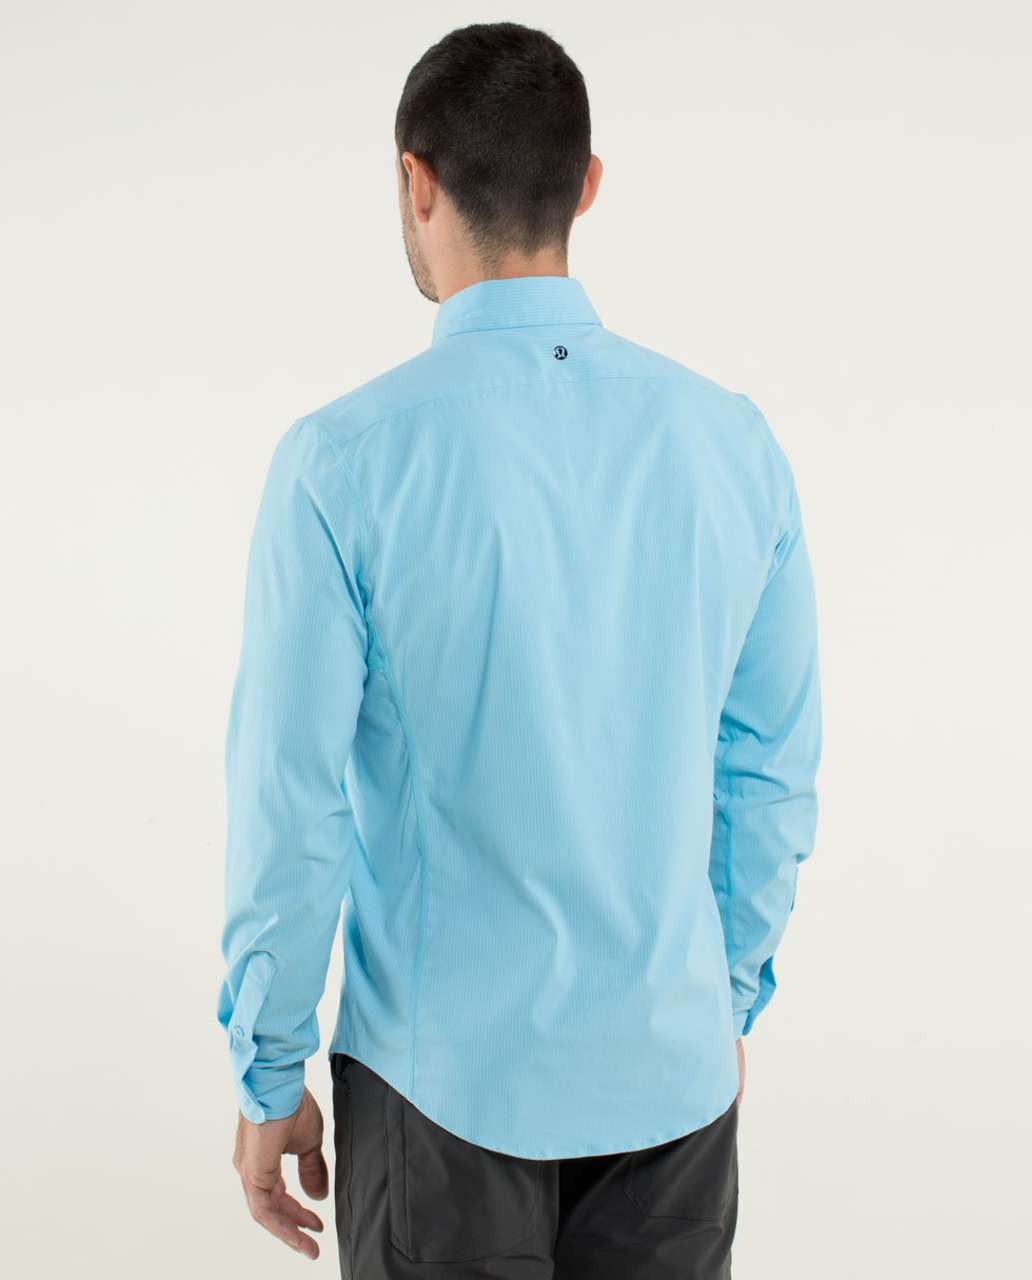 Lululemon Mission Long Sleeve Button Down - Blue Moon